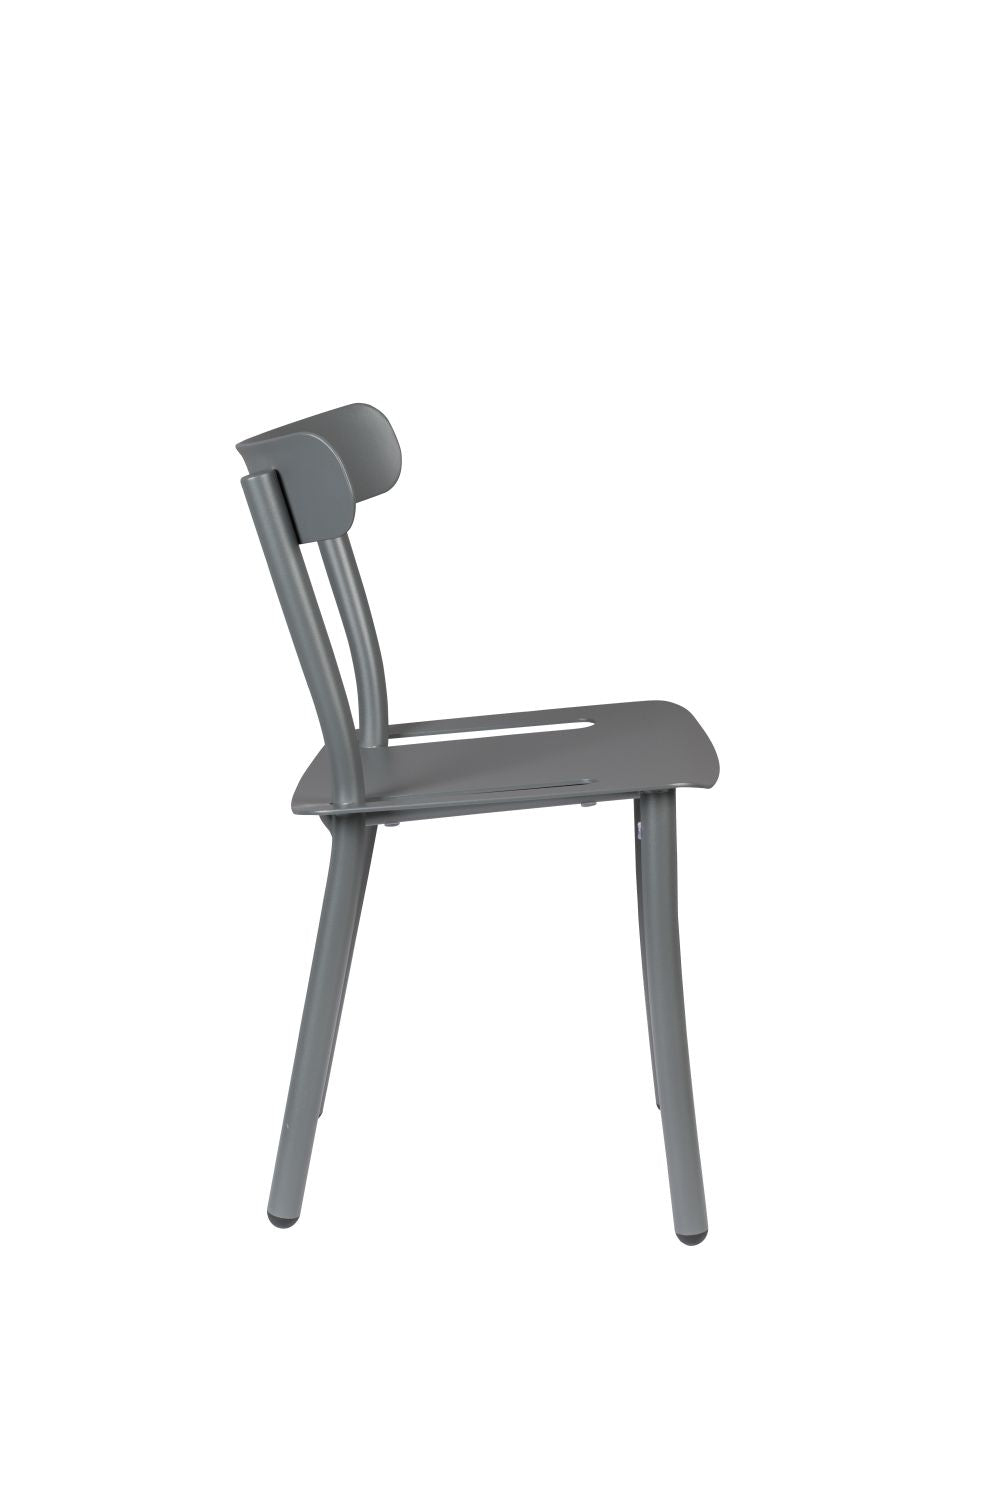  Zuiver-Zuiver Set of 2 Friday Garden Chairs Grey-Grey 73 